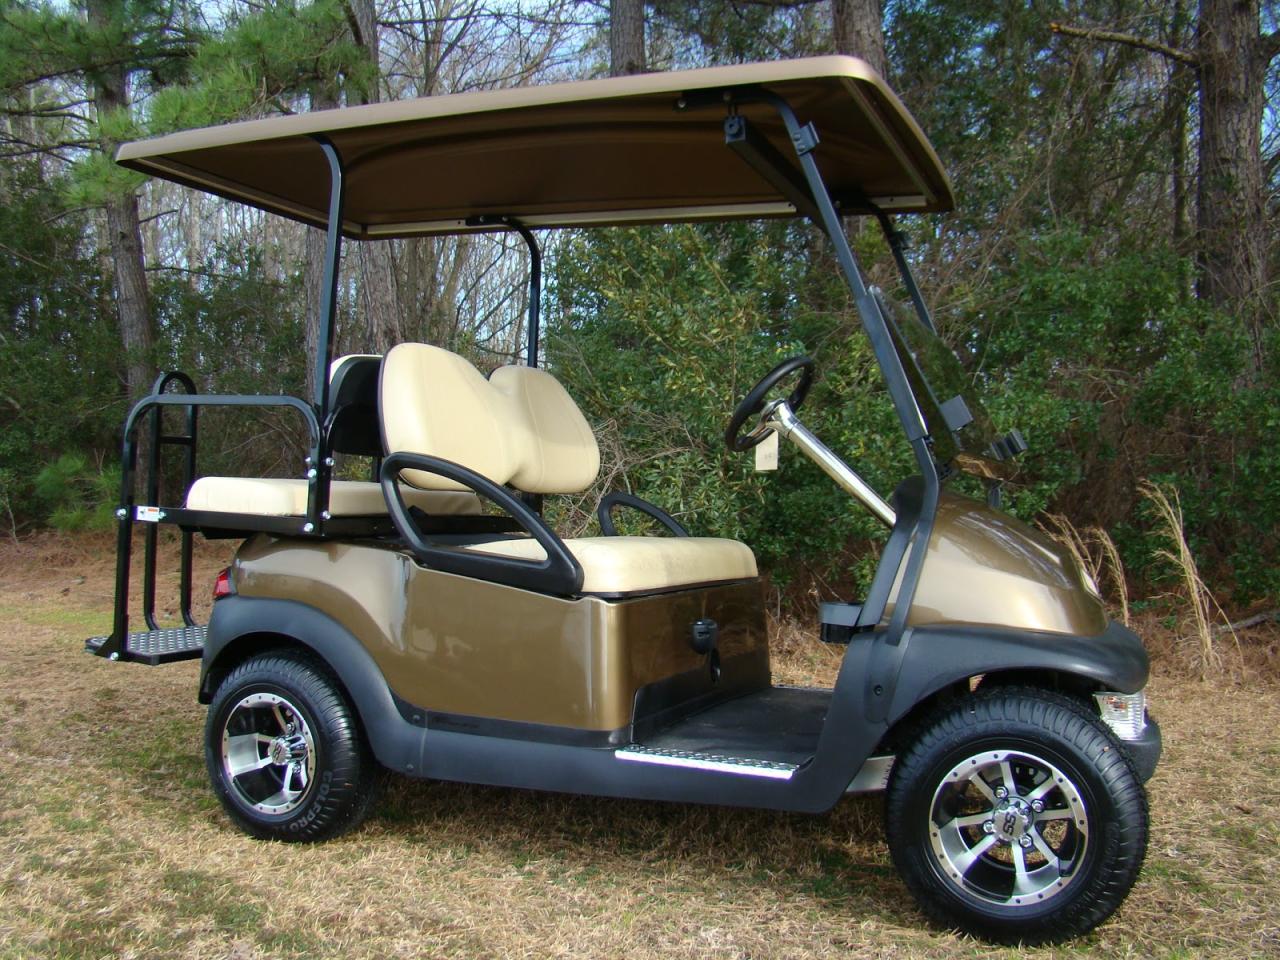 Discover Affordable Used Golf Carts for Sale in Kandiyohi, Minnesota